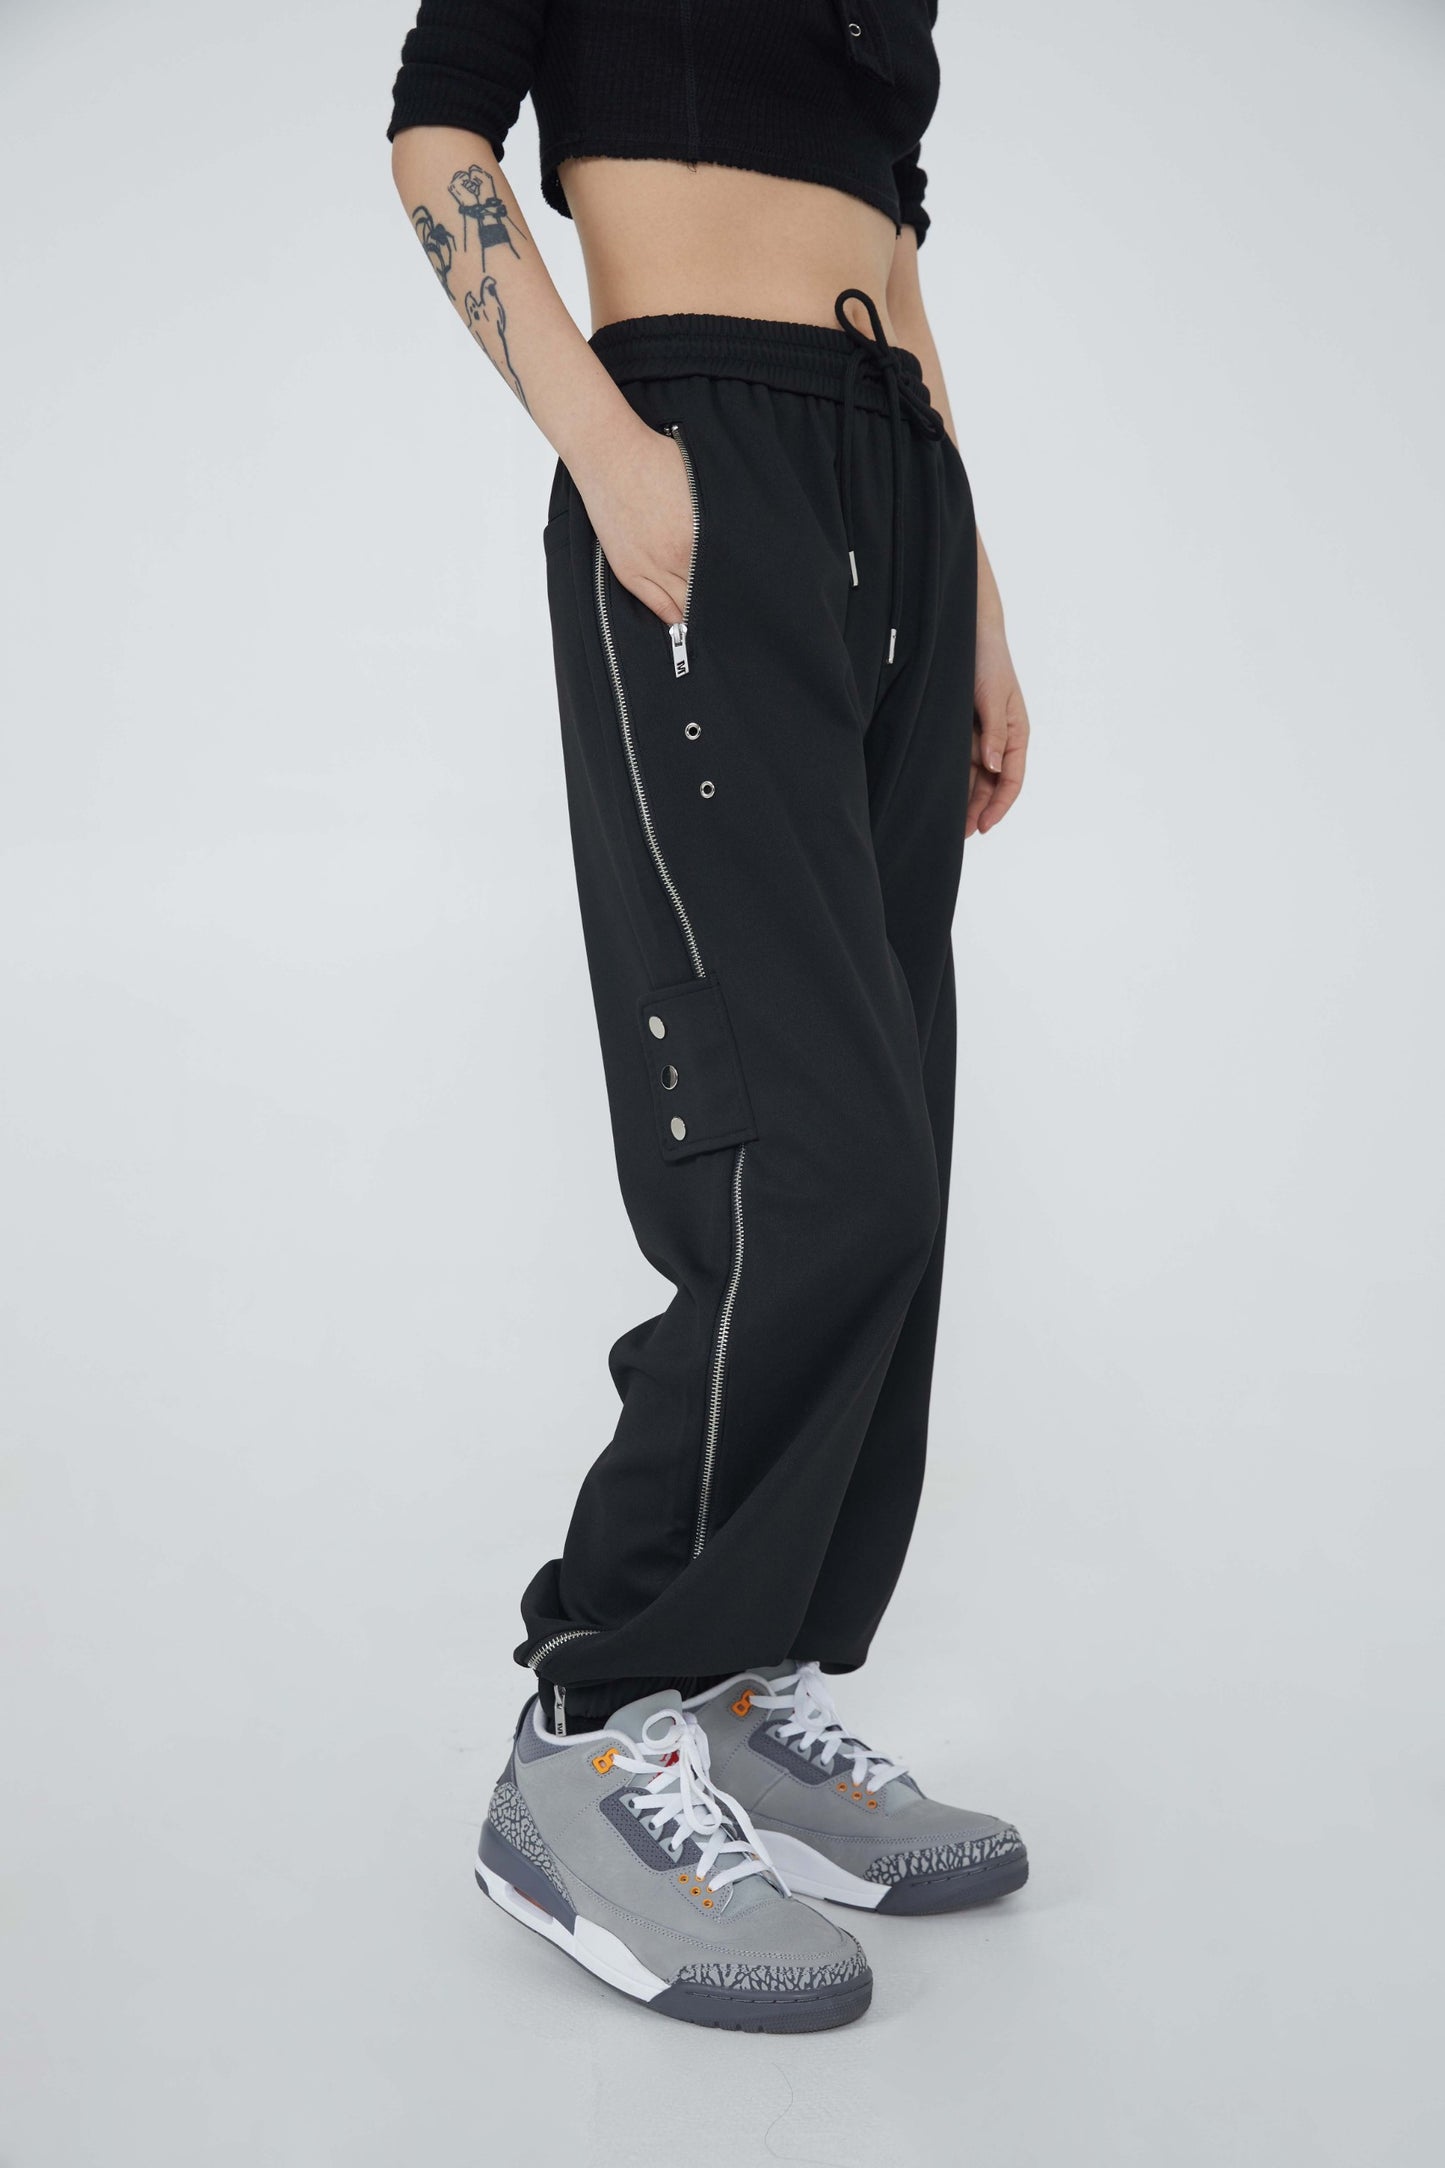 HOLE CONJECTURE TRACK PANTS